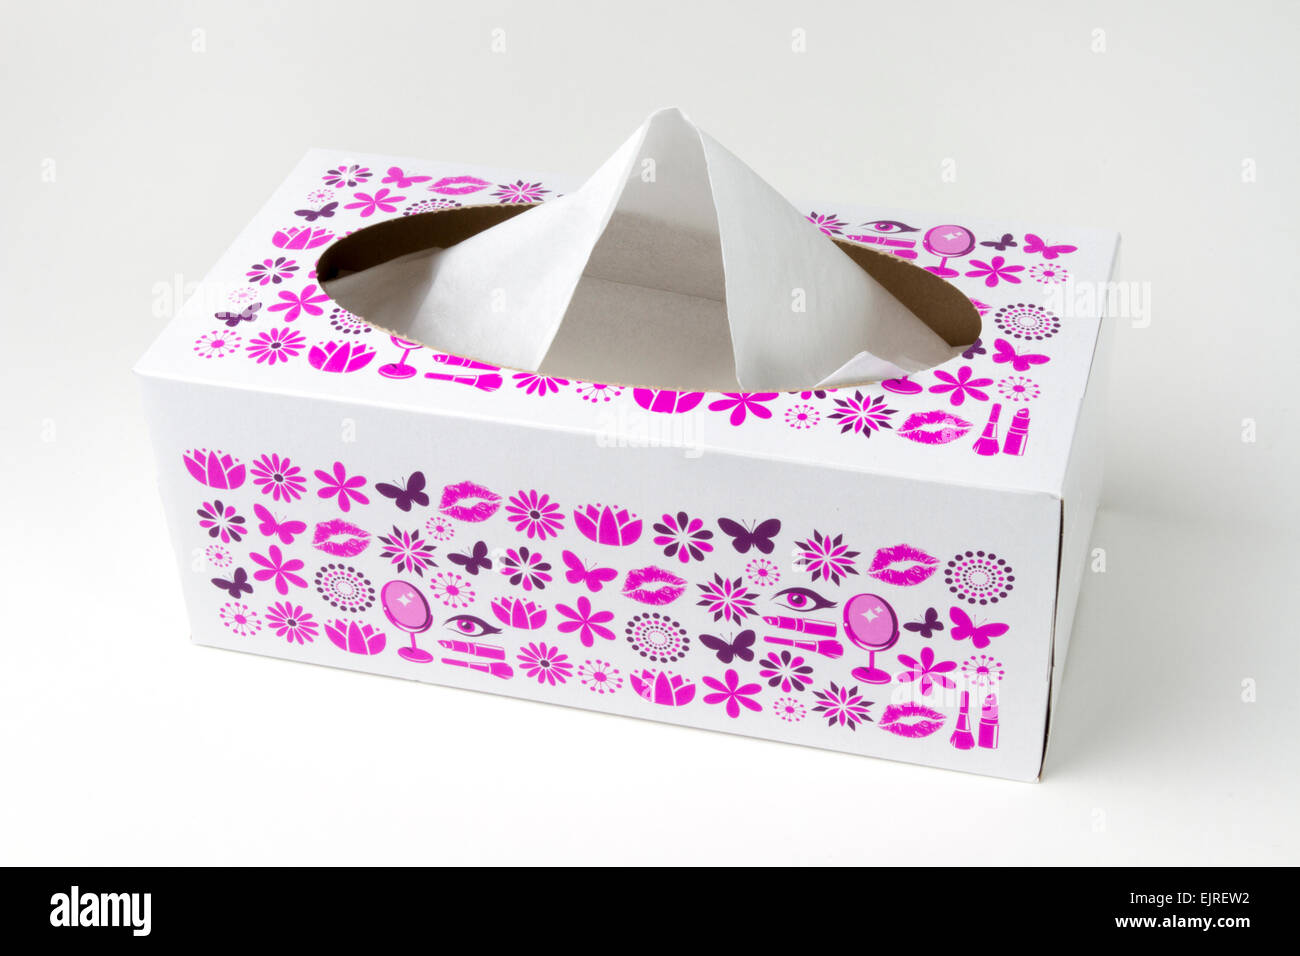 Box of paper tissues Stock Photo